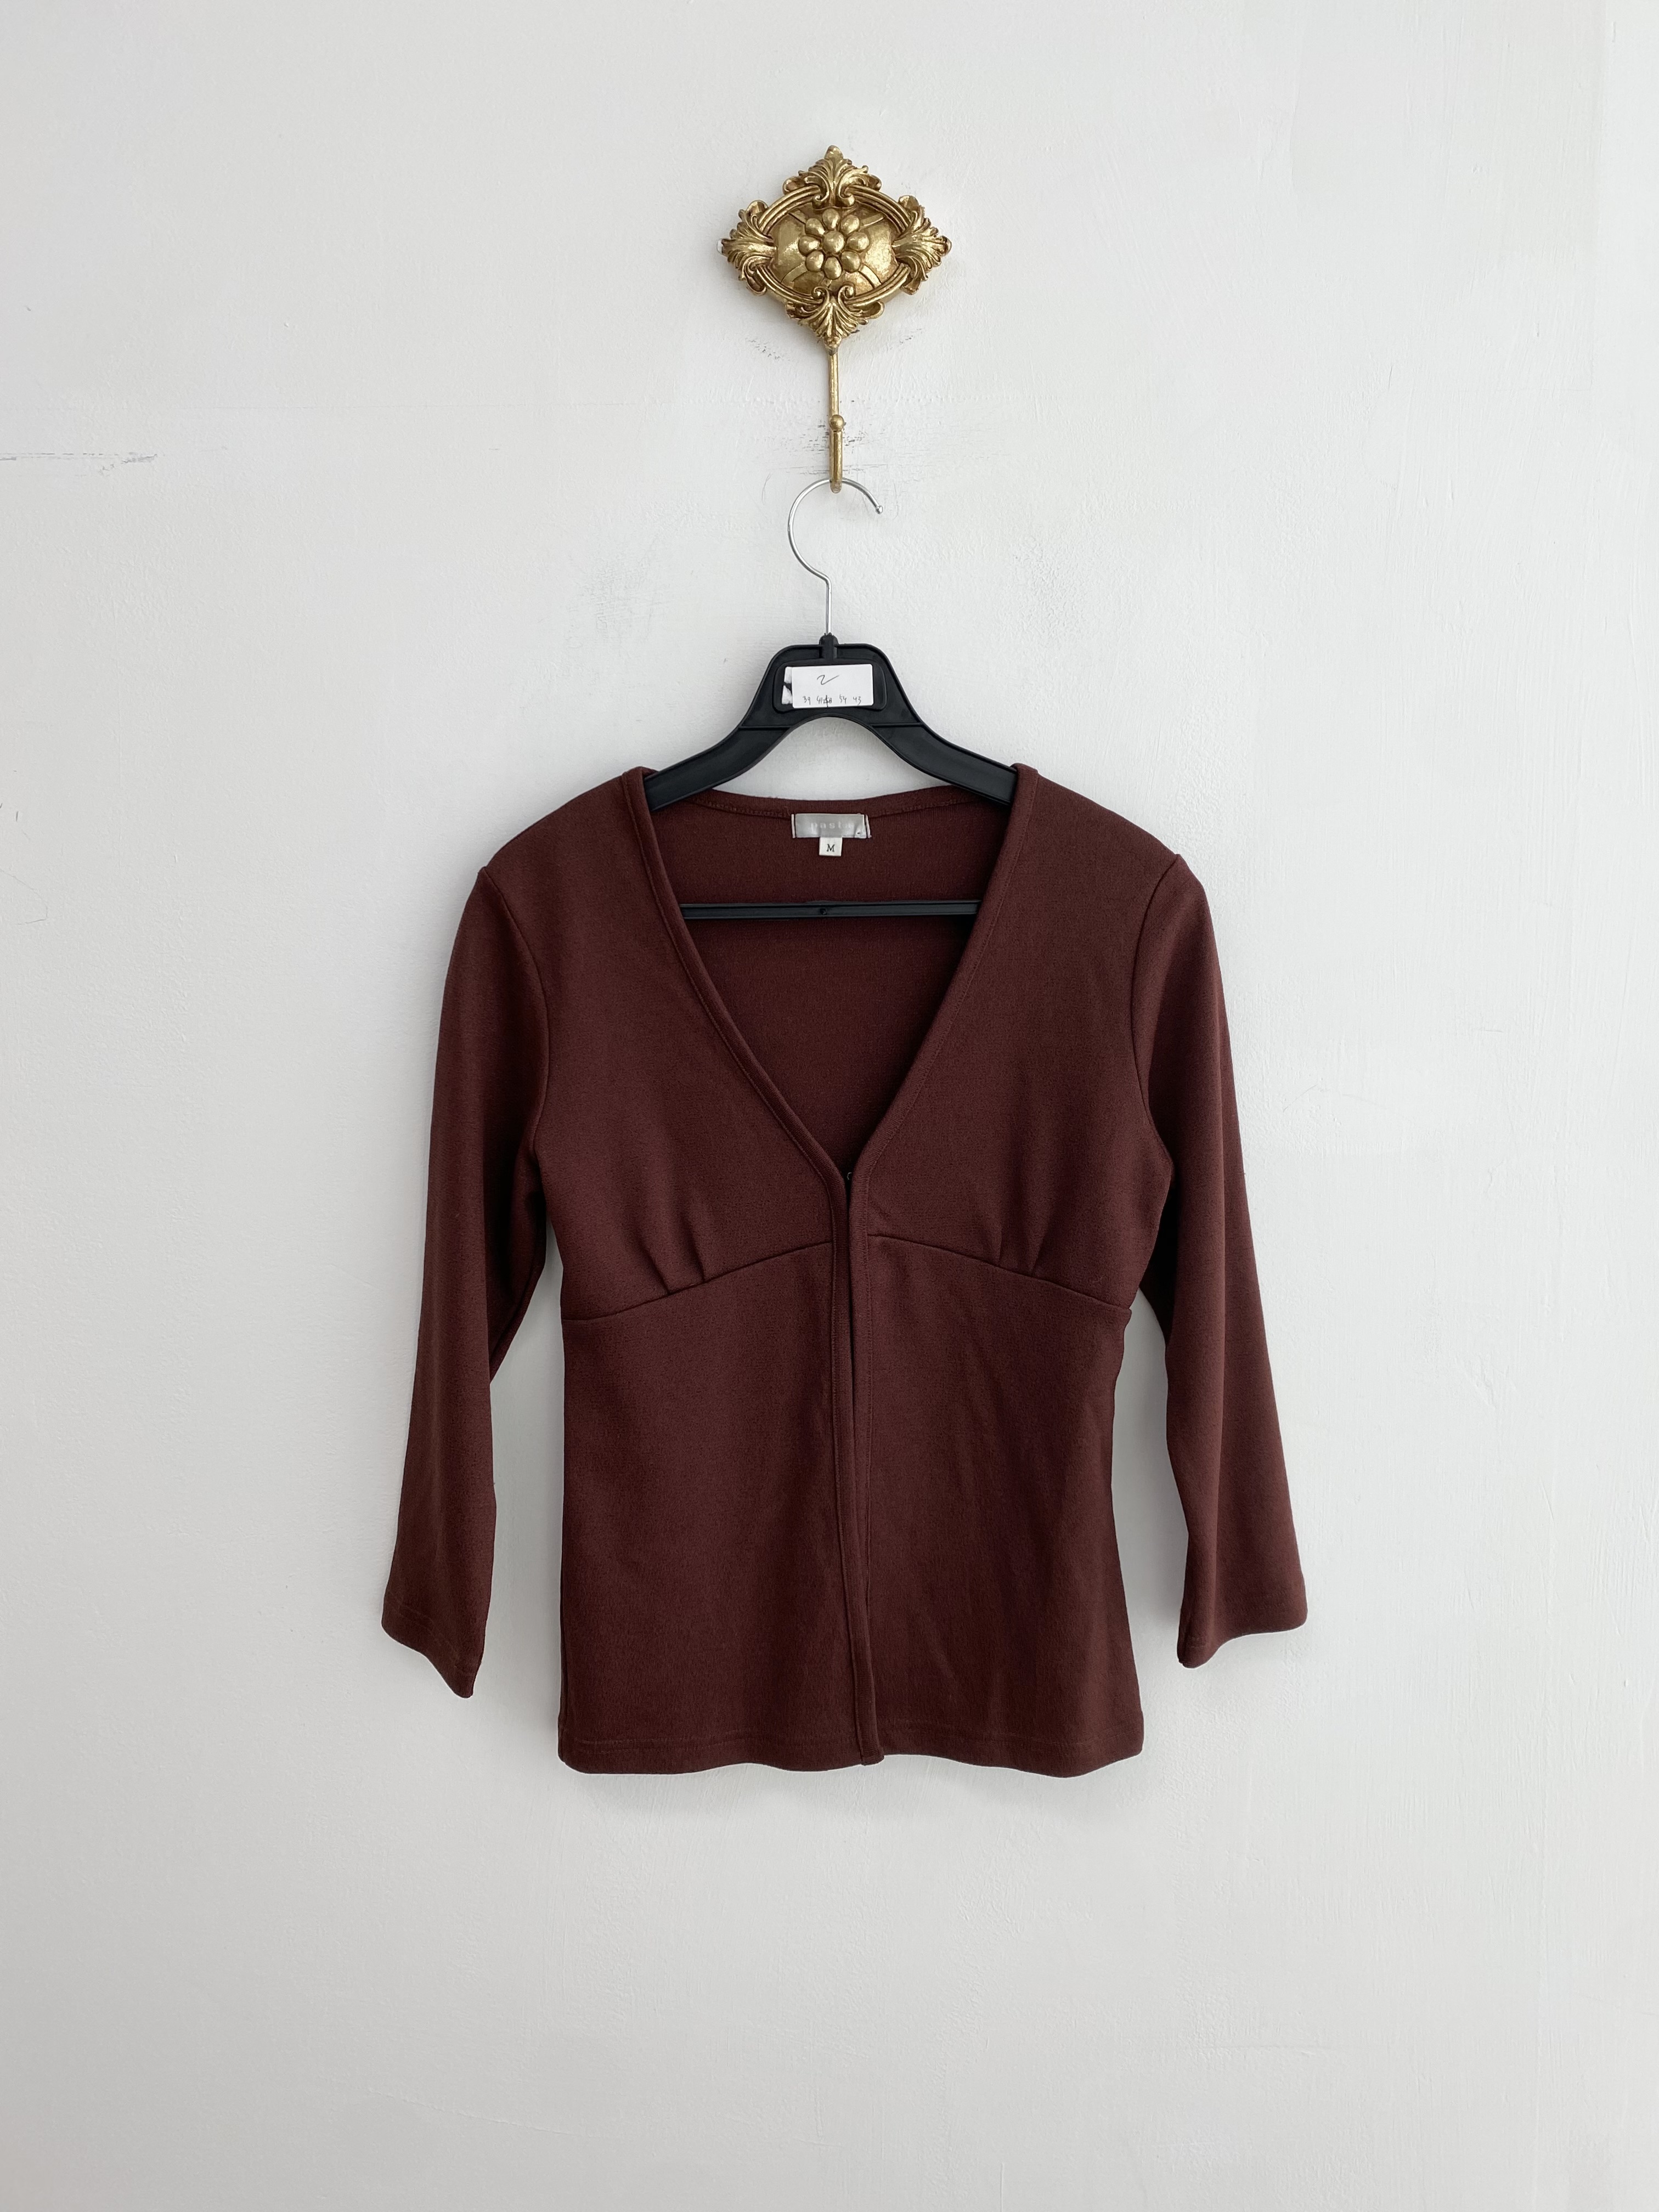 Red brown poly rayon v-neck cardigan